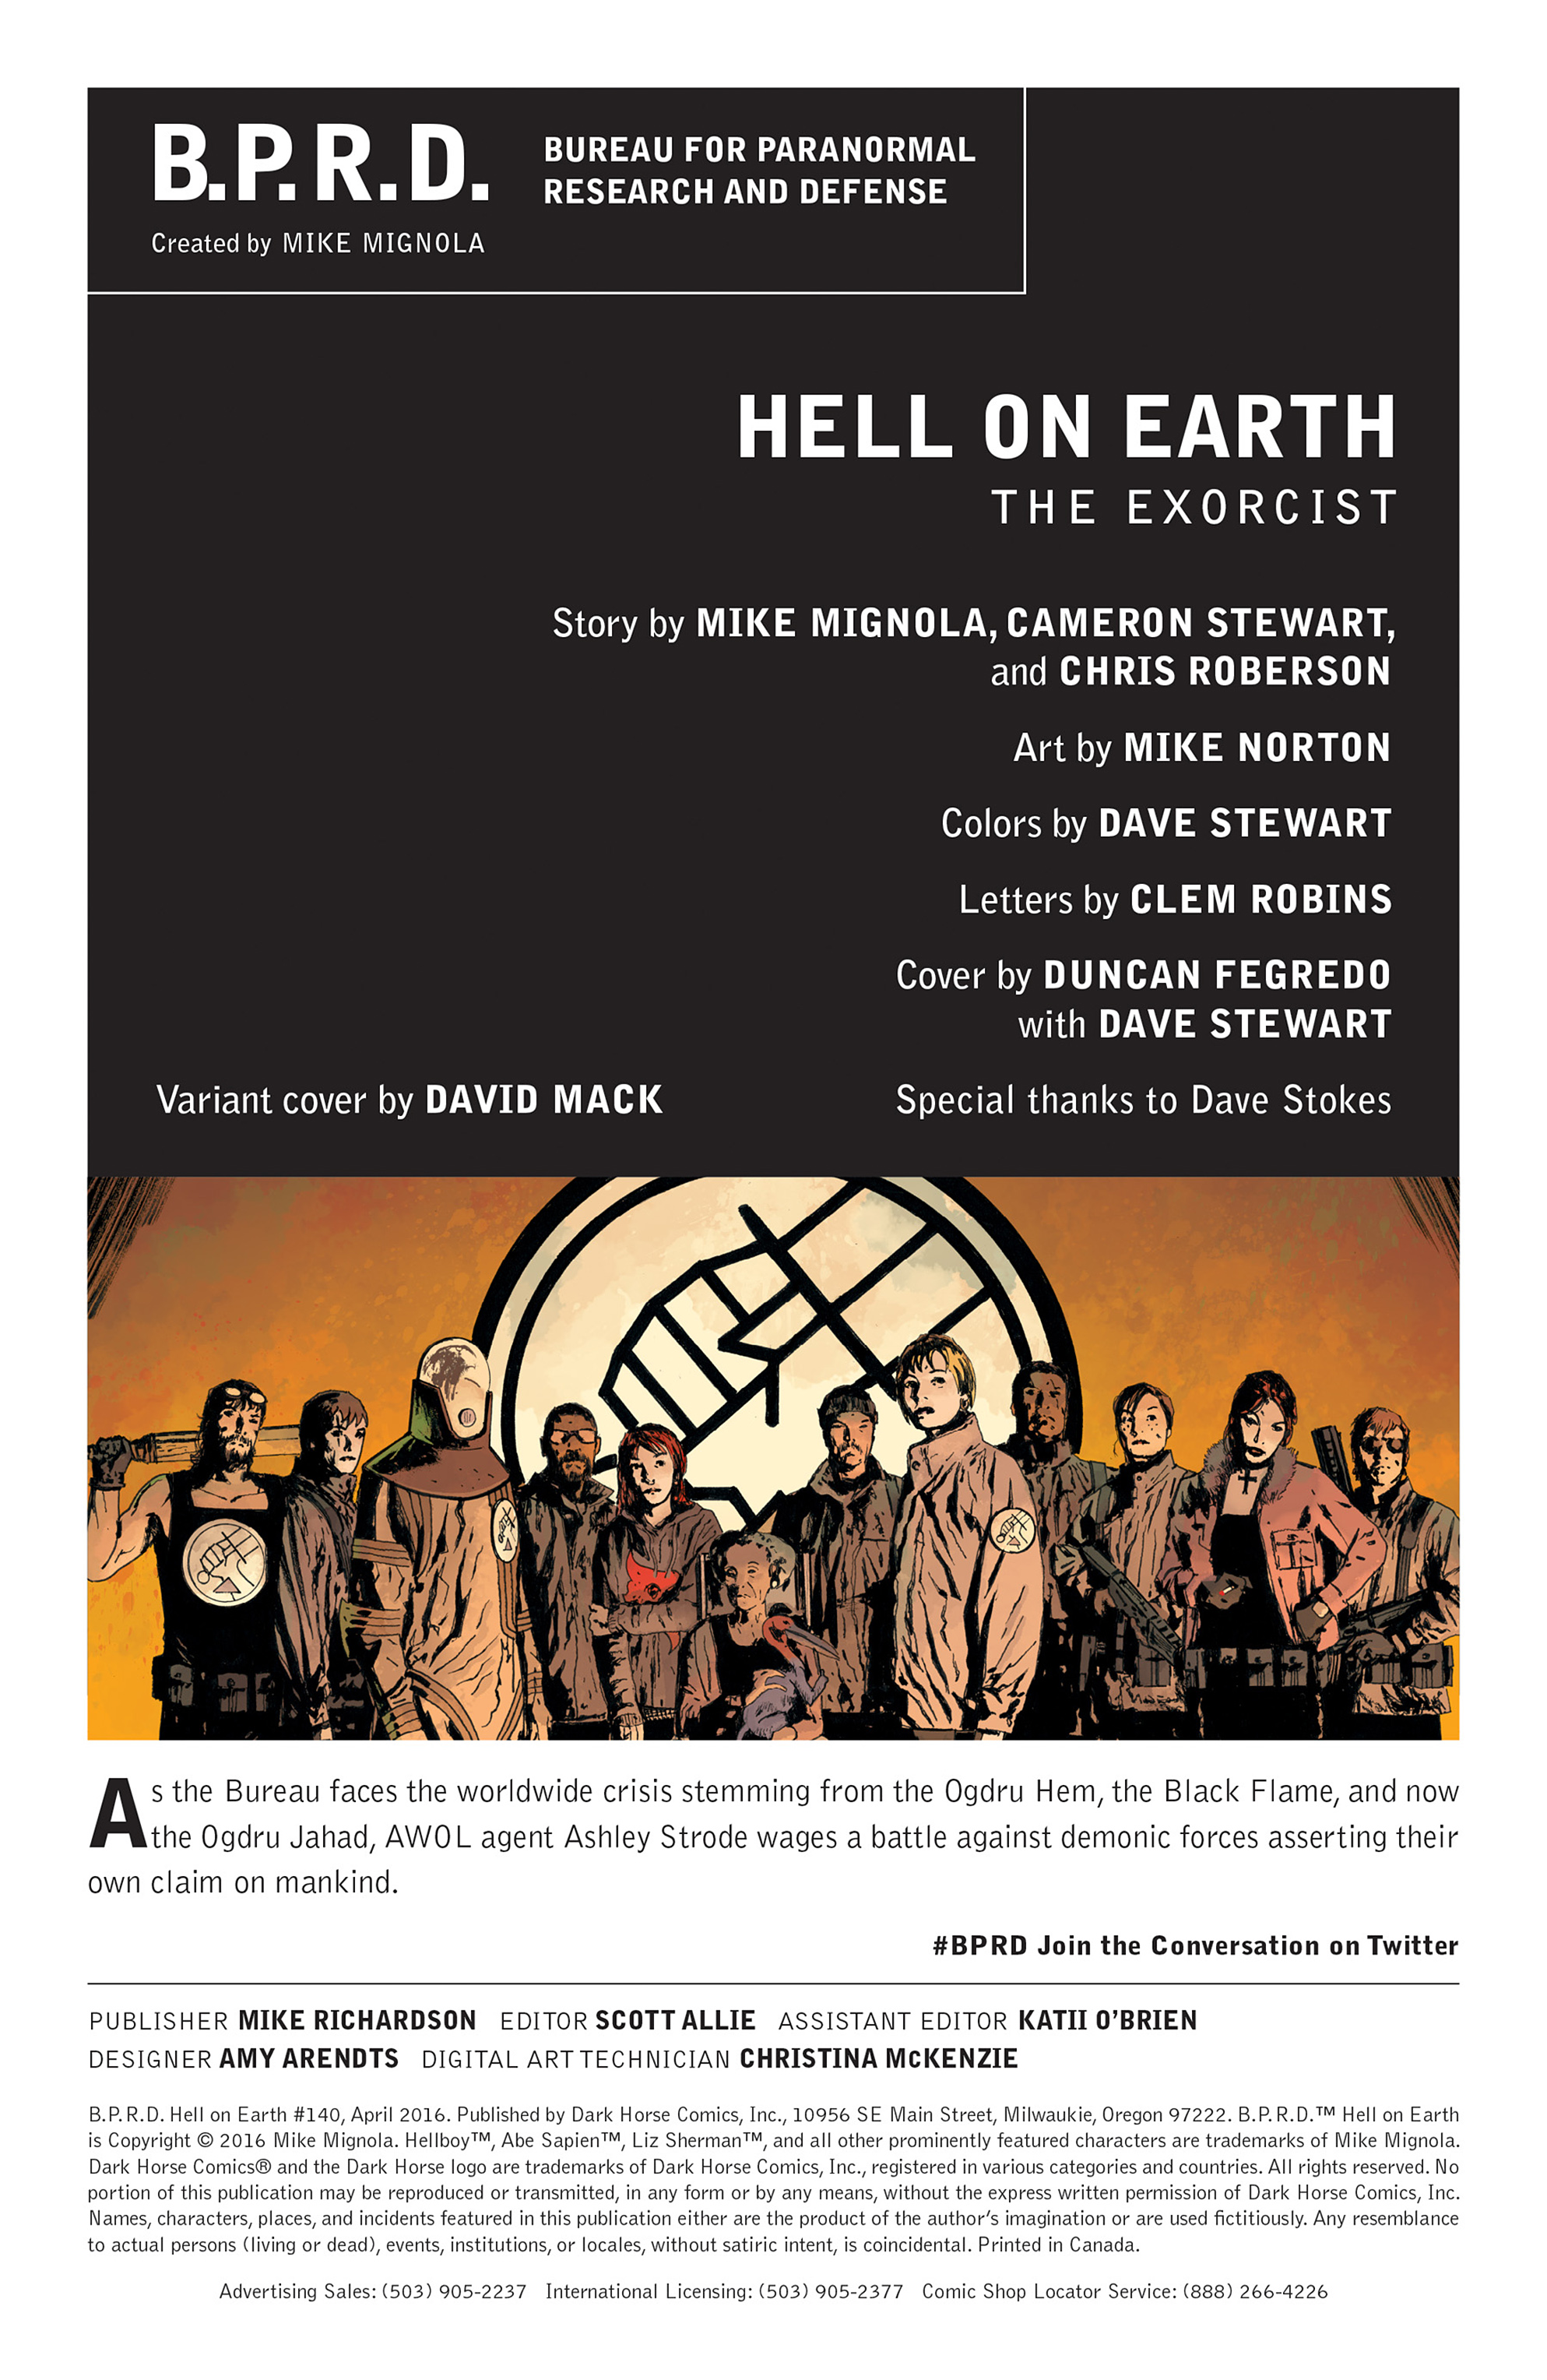 Read online B.P.R.D. Hell on Earth comic -  Issue #140 - 2